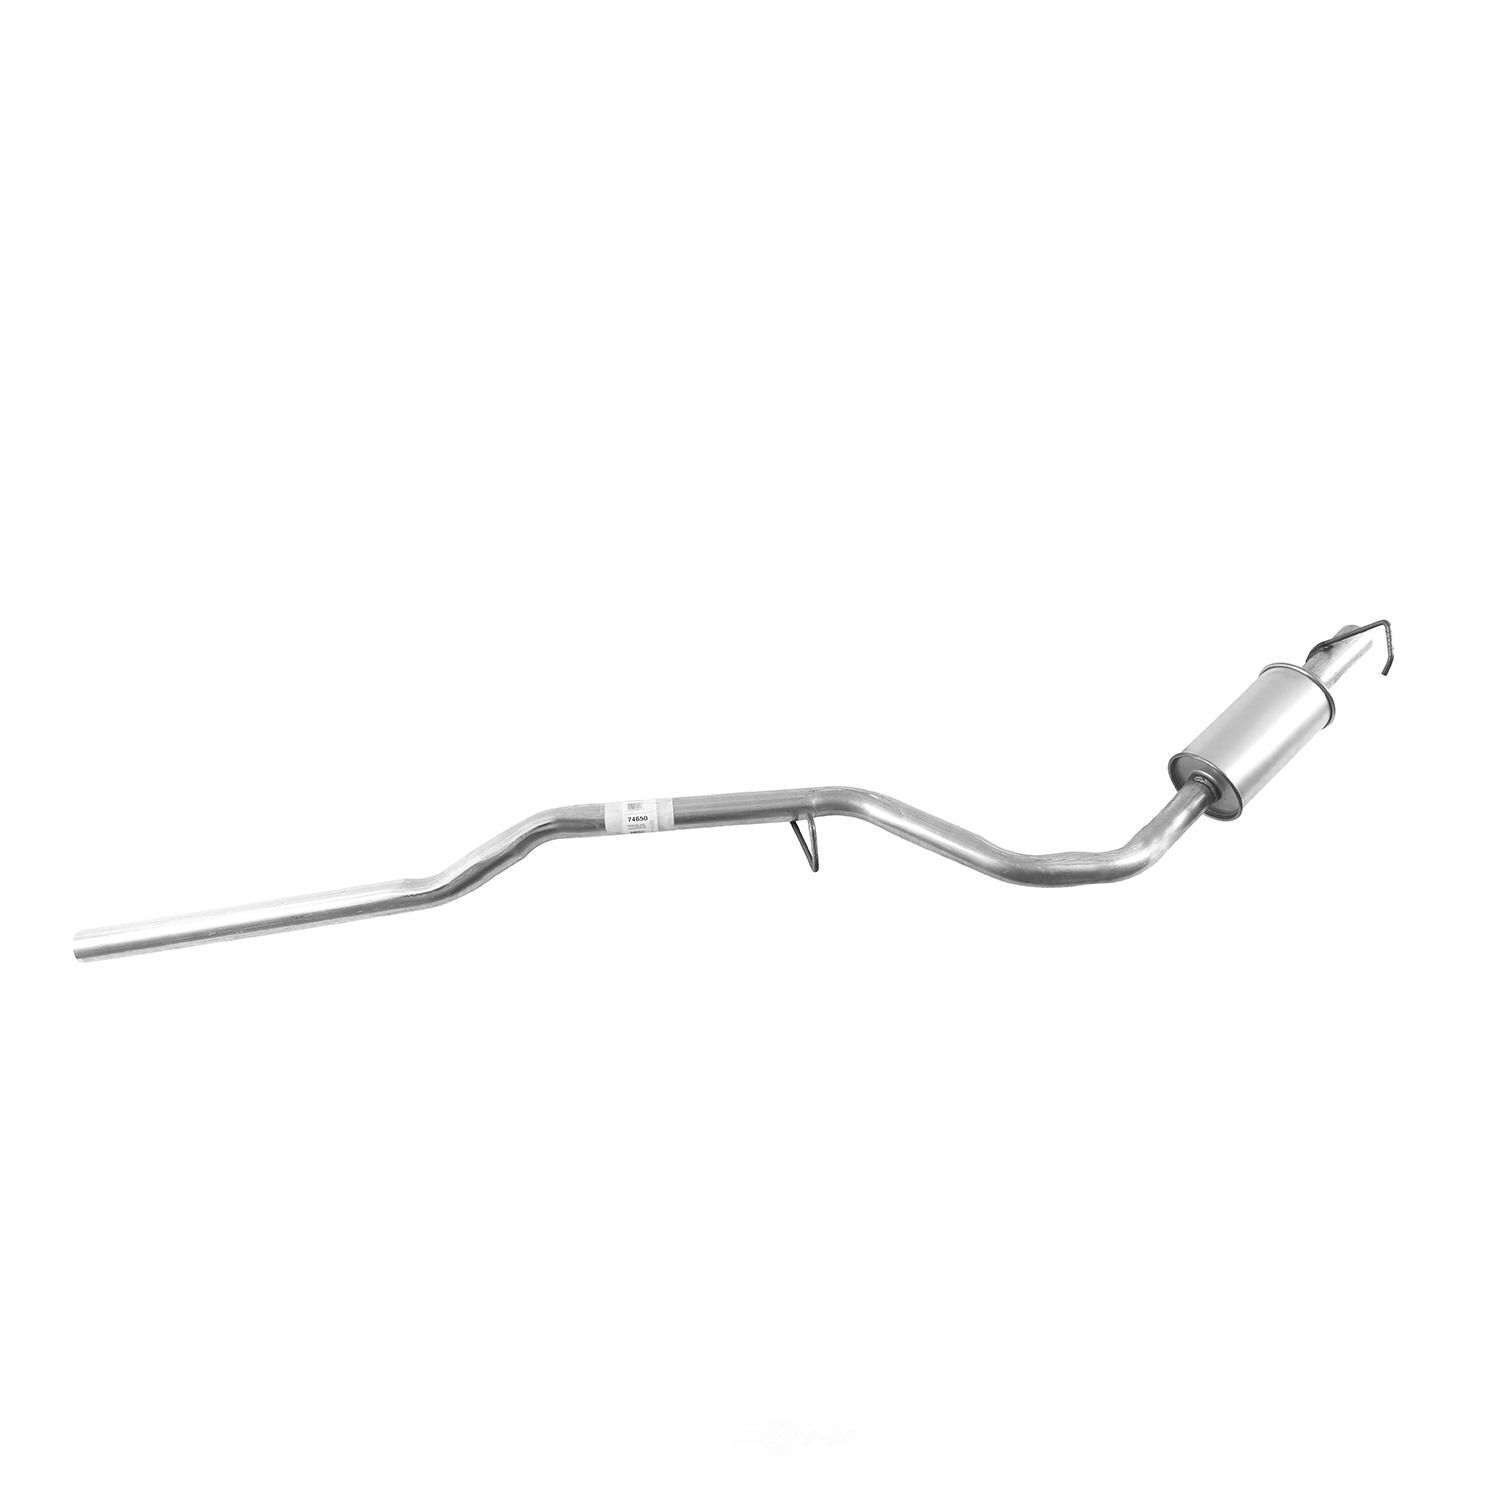 Exhaust Tail Pipe Front AP Exhaust 74650 fits 99-03 Ford Windstar 3.8L-V6